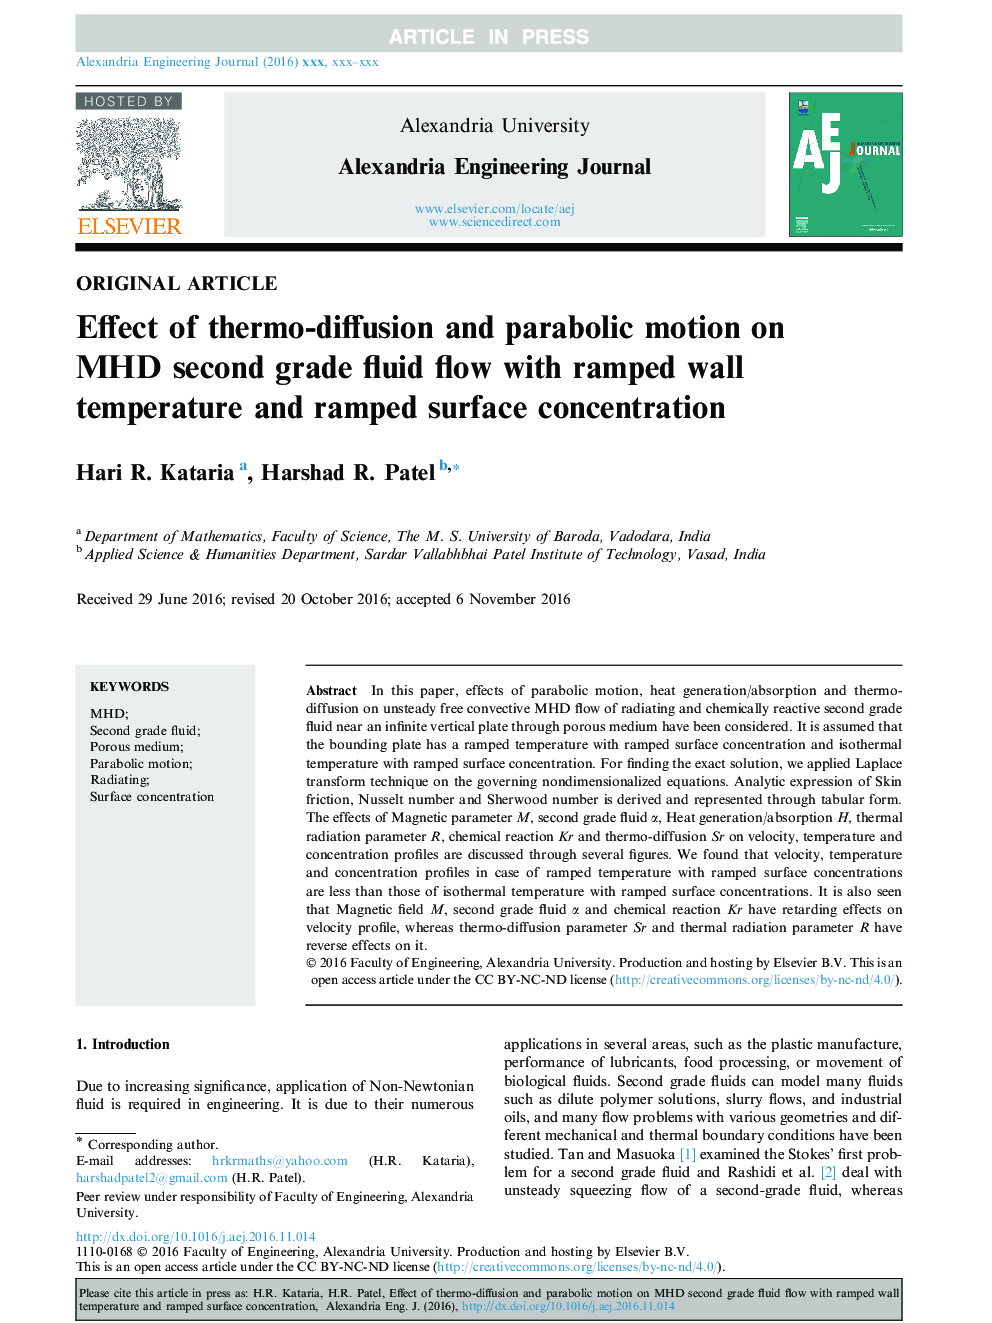 Effect of thermo-diffusion and parabolic motion on MHD second grade fluid flow with ramped wall temperature and ramped surface concentration